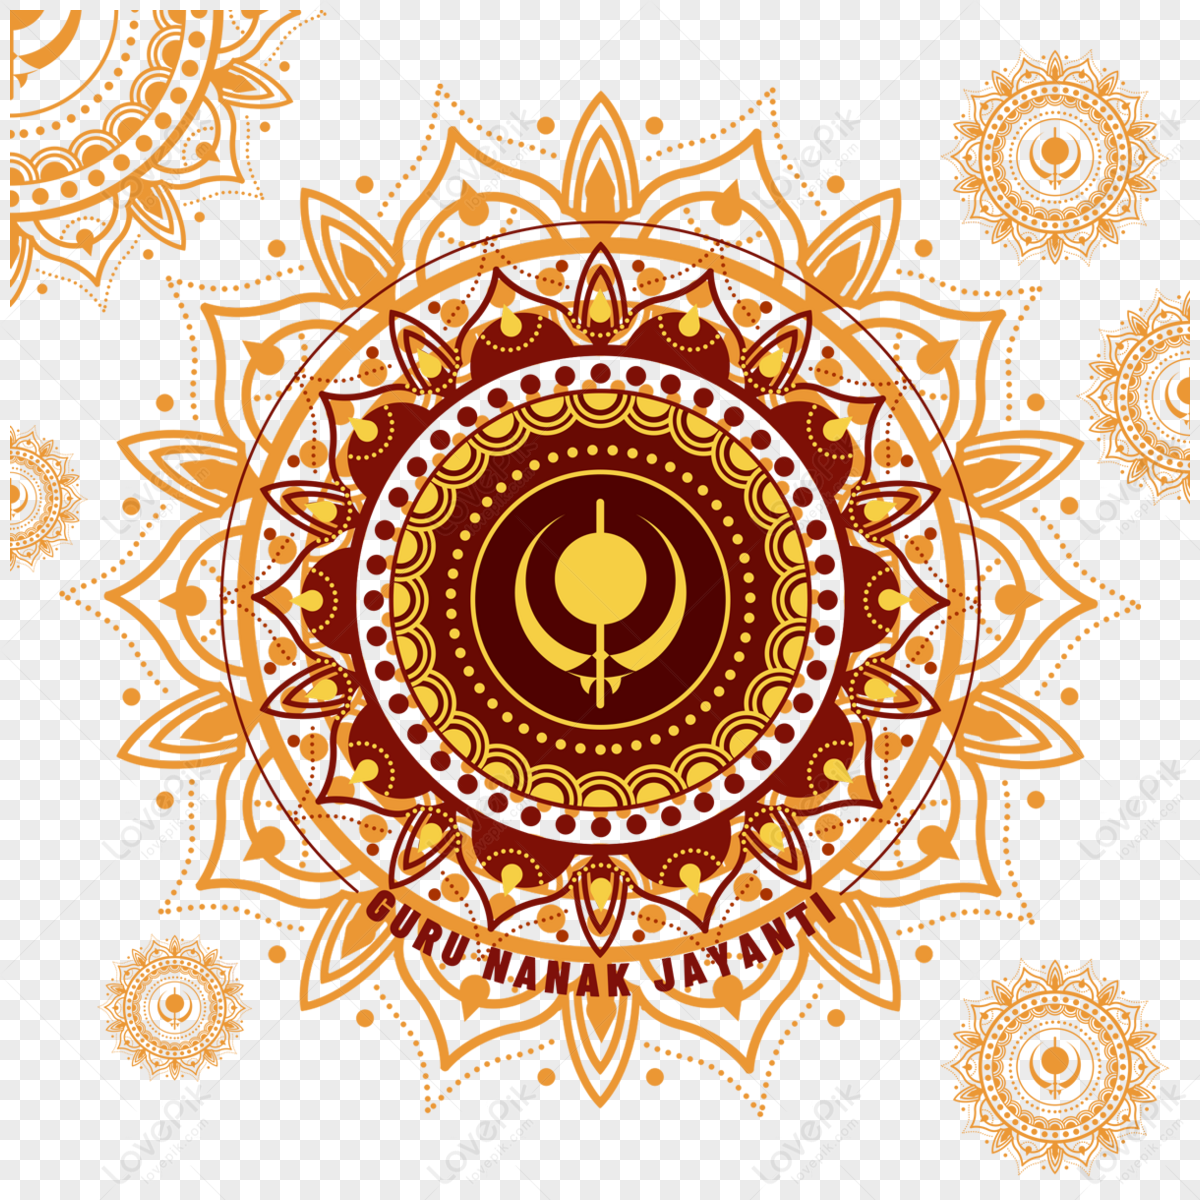 Guru Nanak Sikh Religion Founder Portrait Vector Illustration Jayanti, Guru  Nanak, Guru Nanak Jayanti, Portrait PNG and Vector with Transparent  Background for Free Download